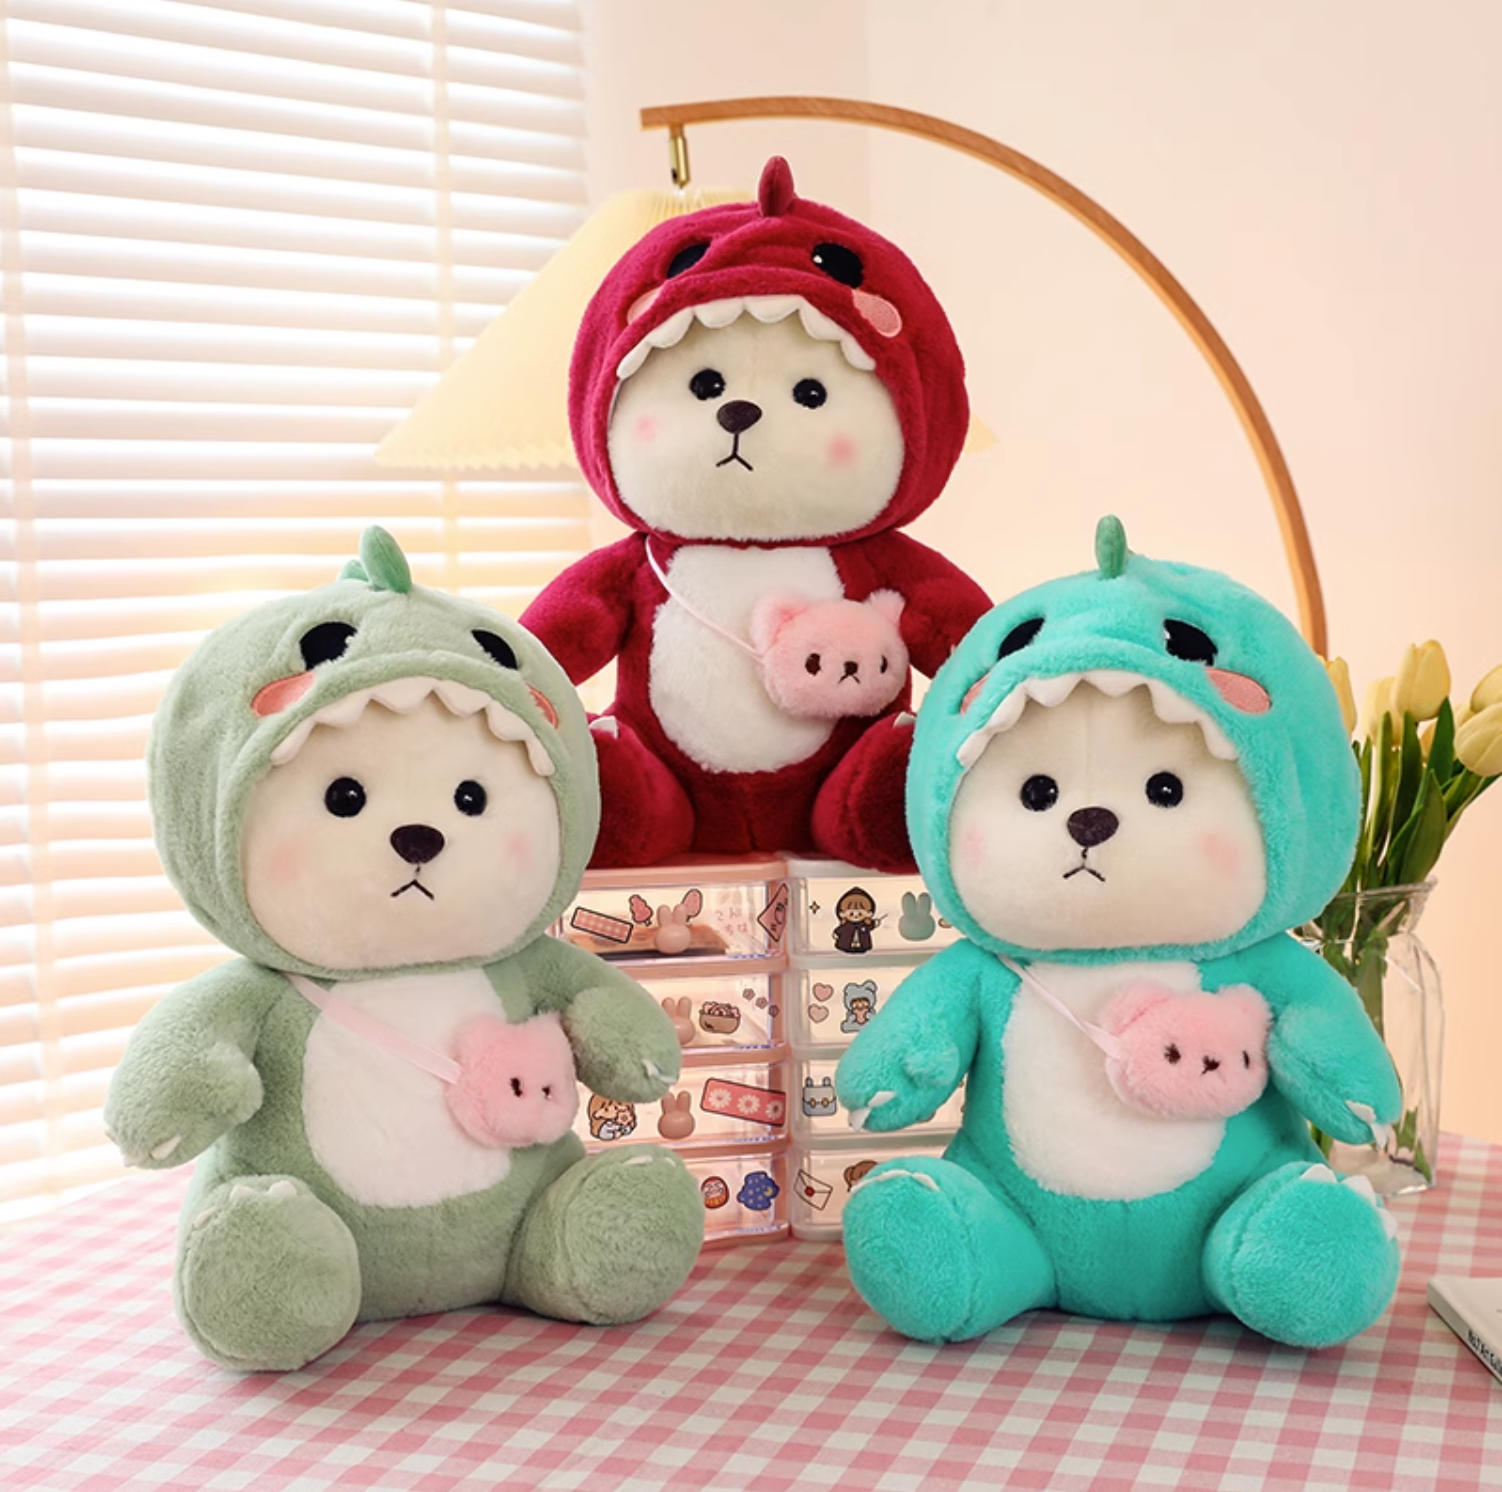 omgkawaii The cuddliest and most adorable bear plushie